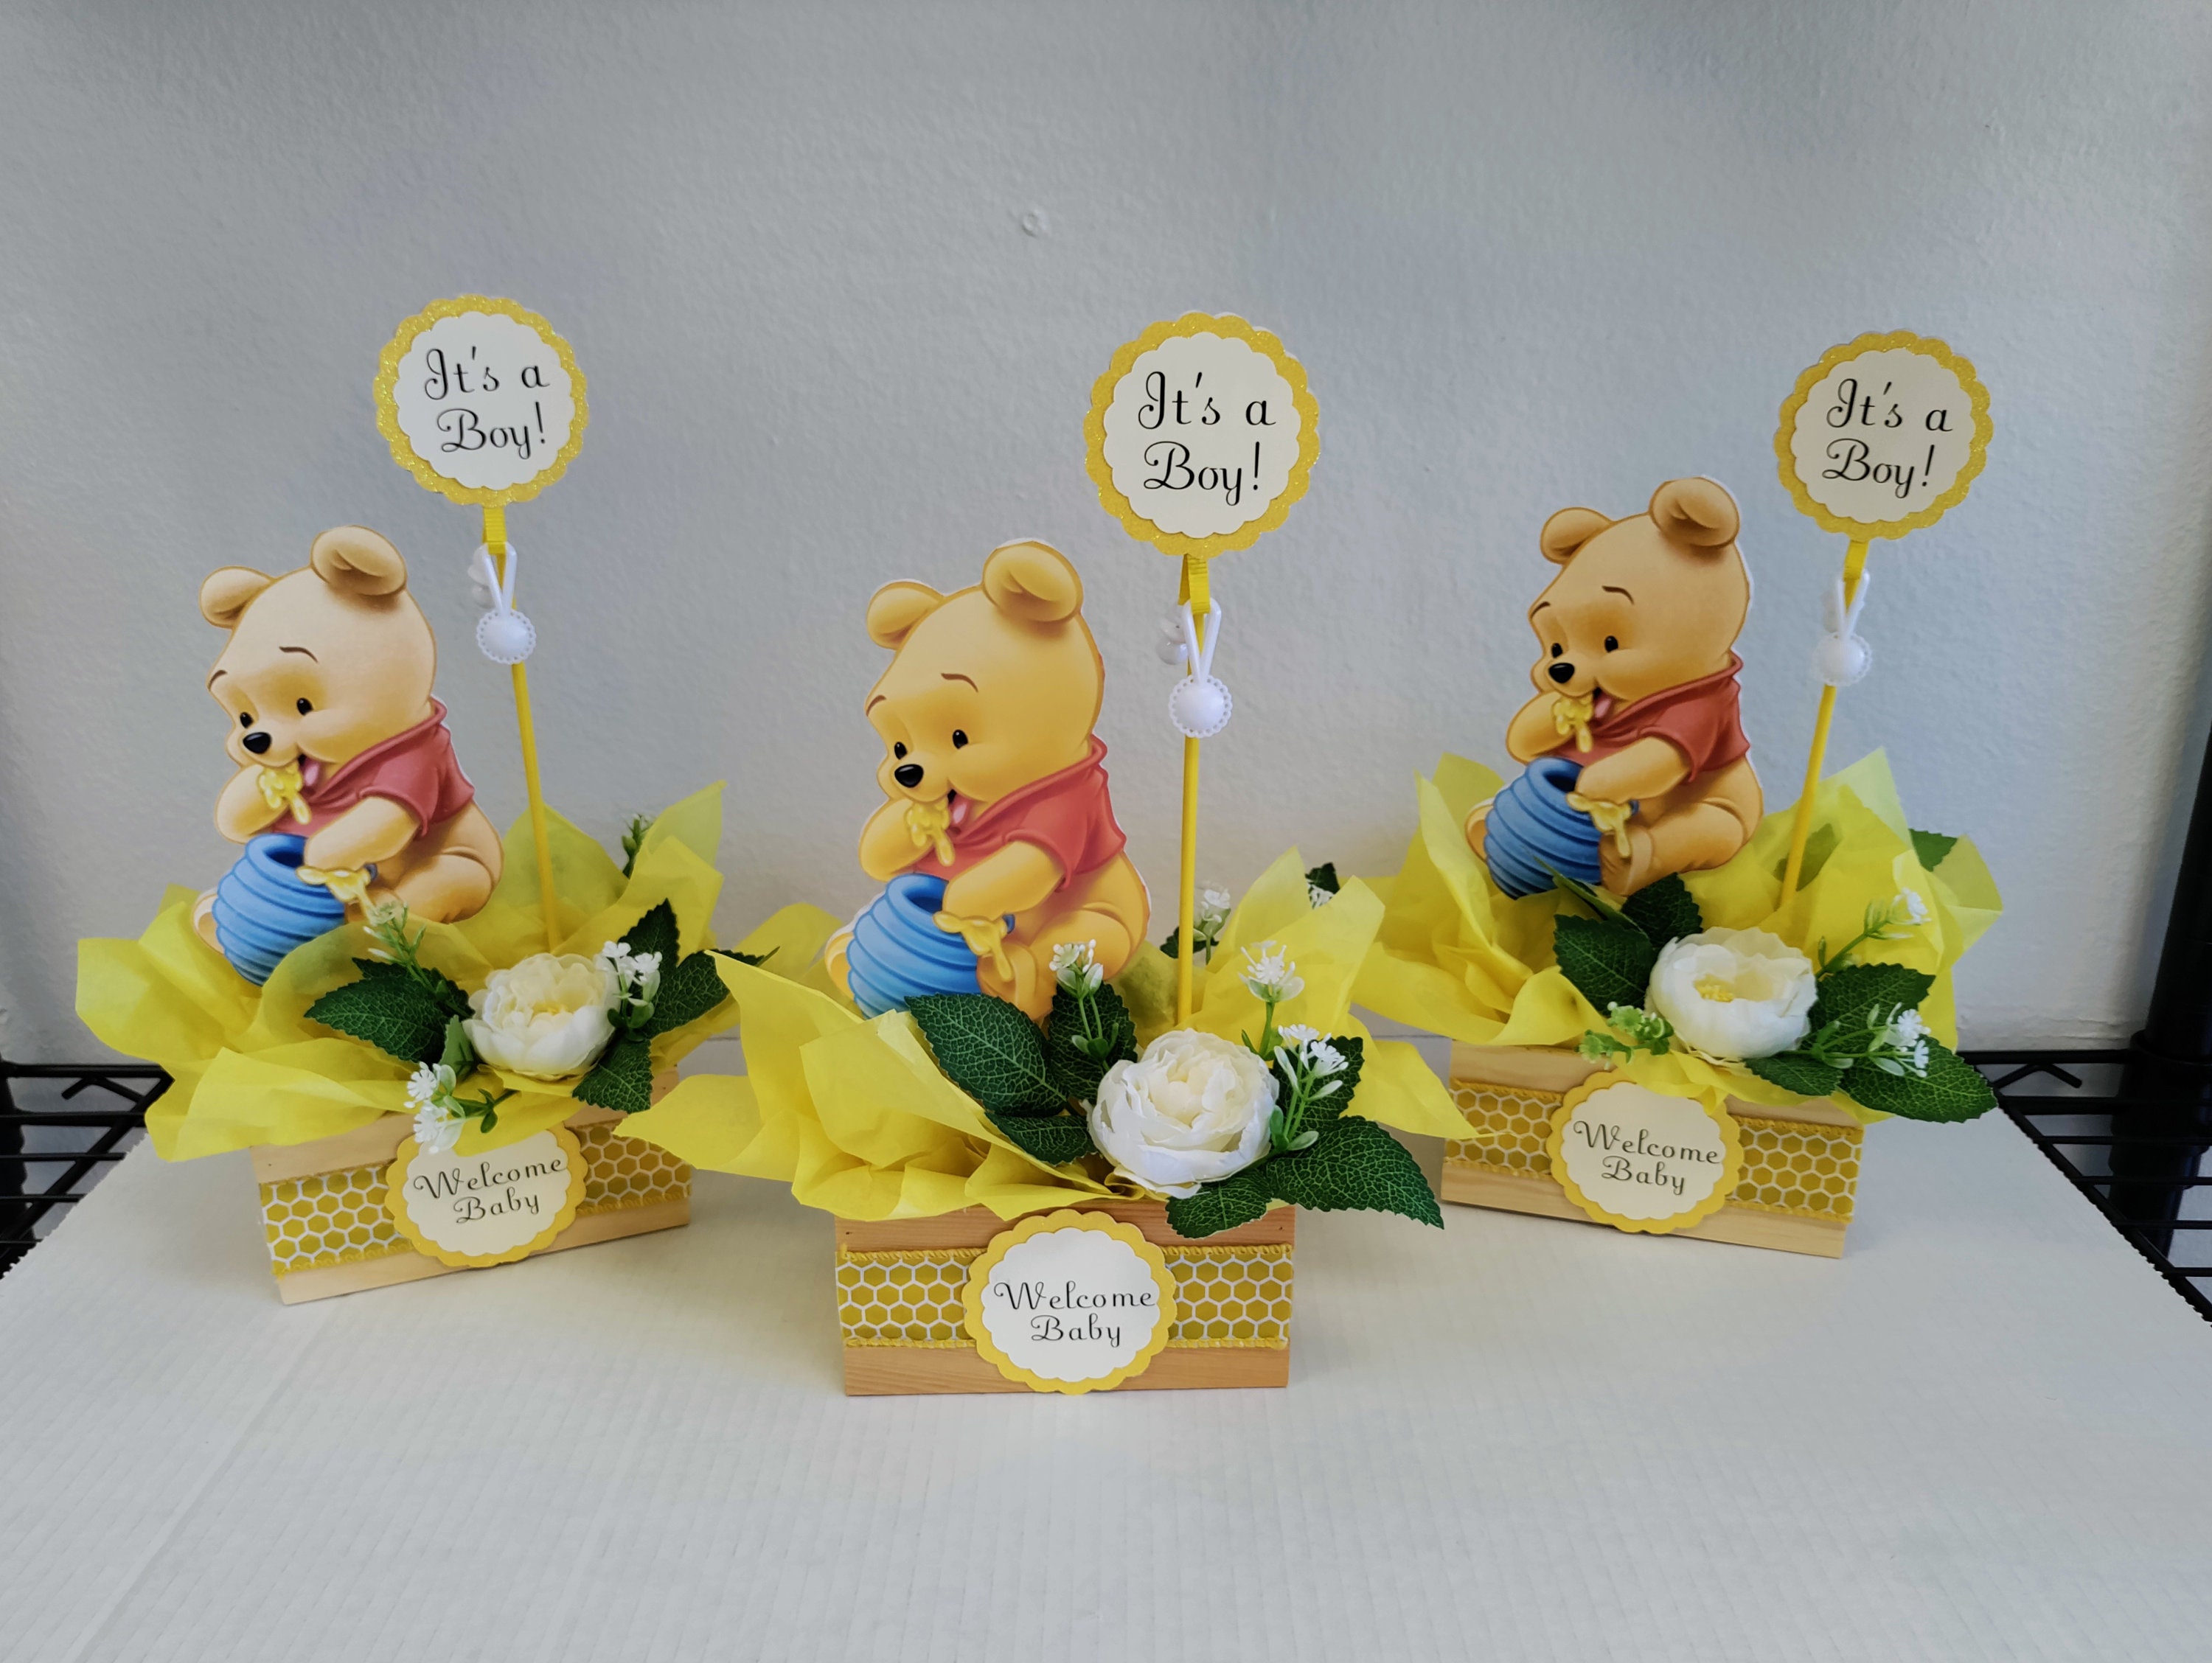 thinkstar 16 Pcs Classic The Pooh Centerpieces For Baby Shower Decorations Winnie  Centerpieces Table Toppers On